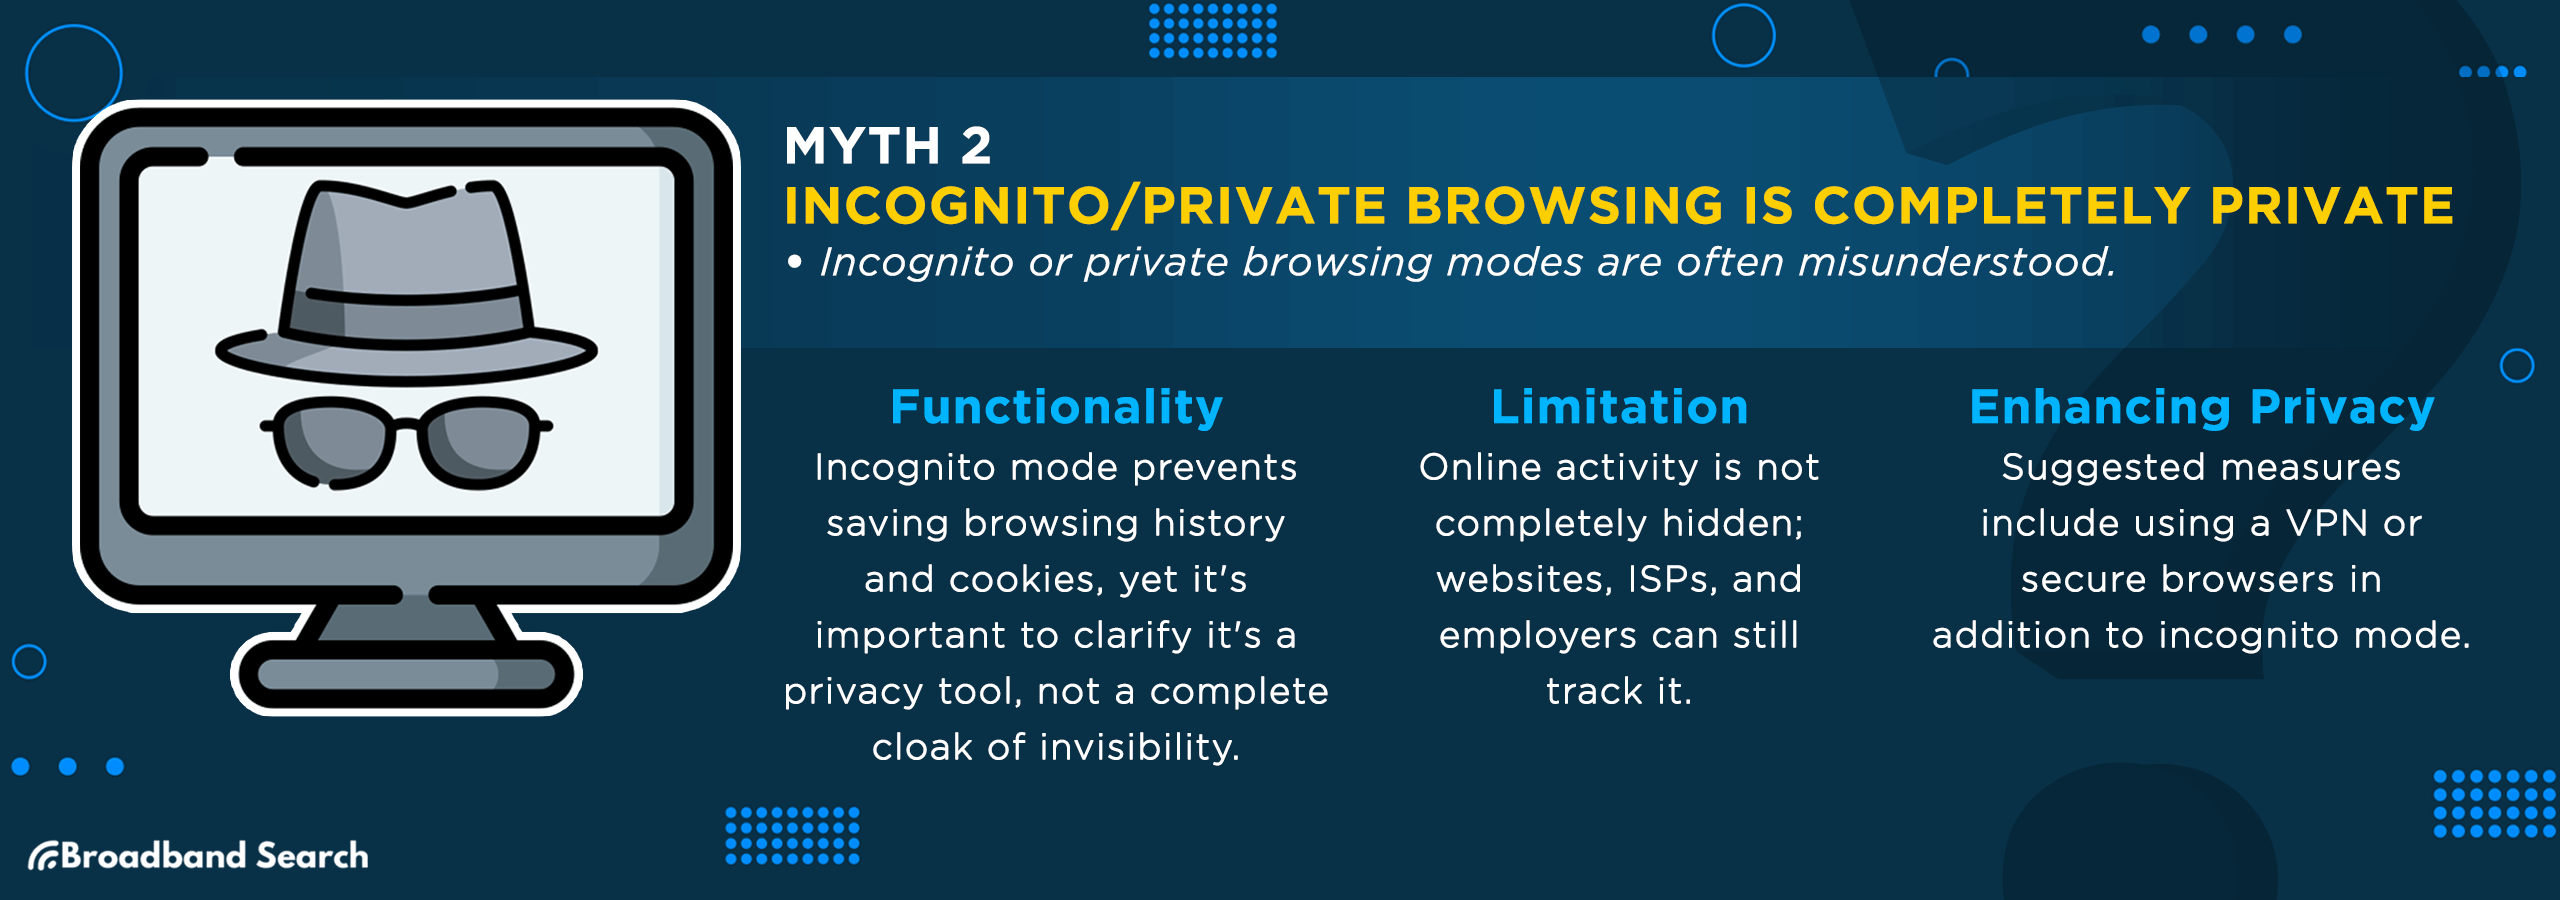 the second internet myth, incognito/private browsing is completely private